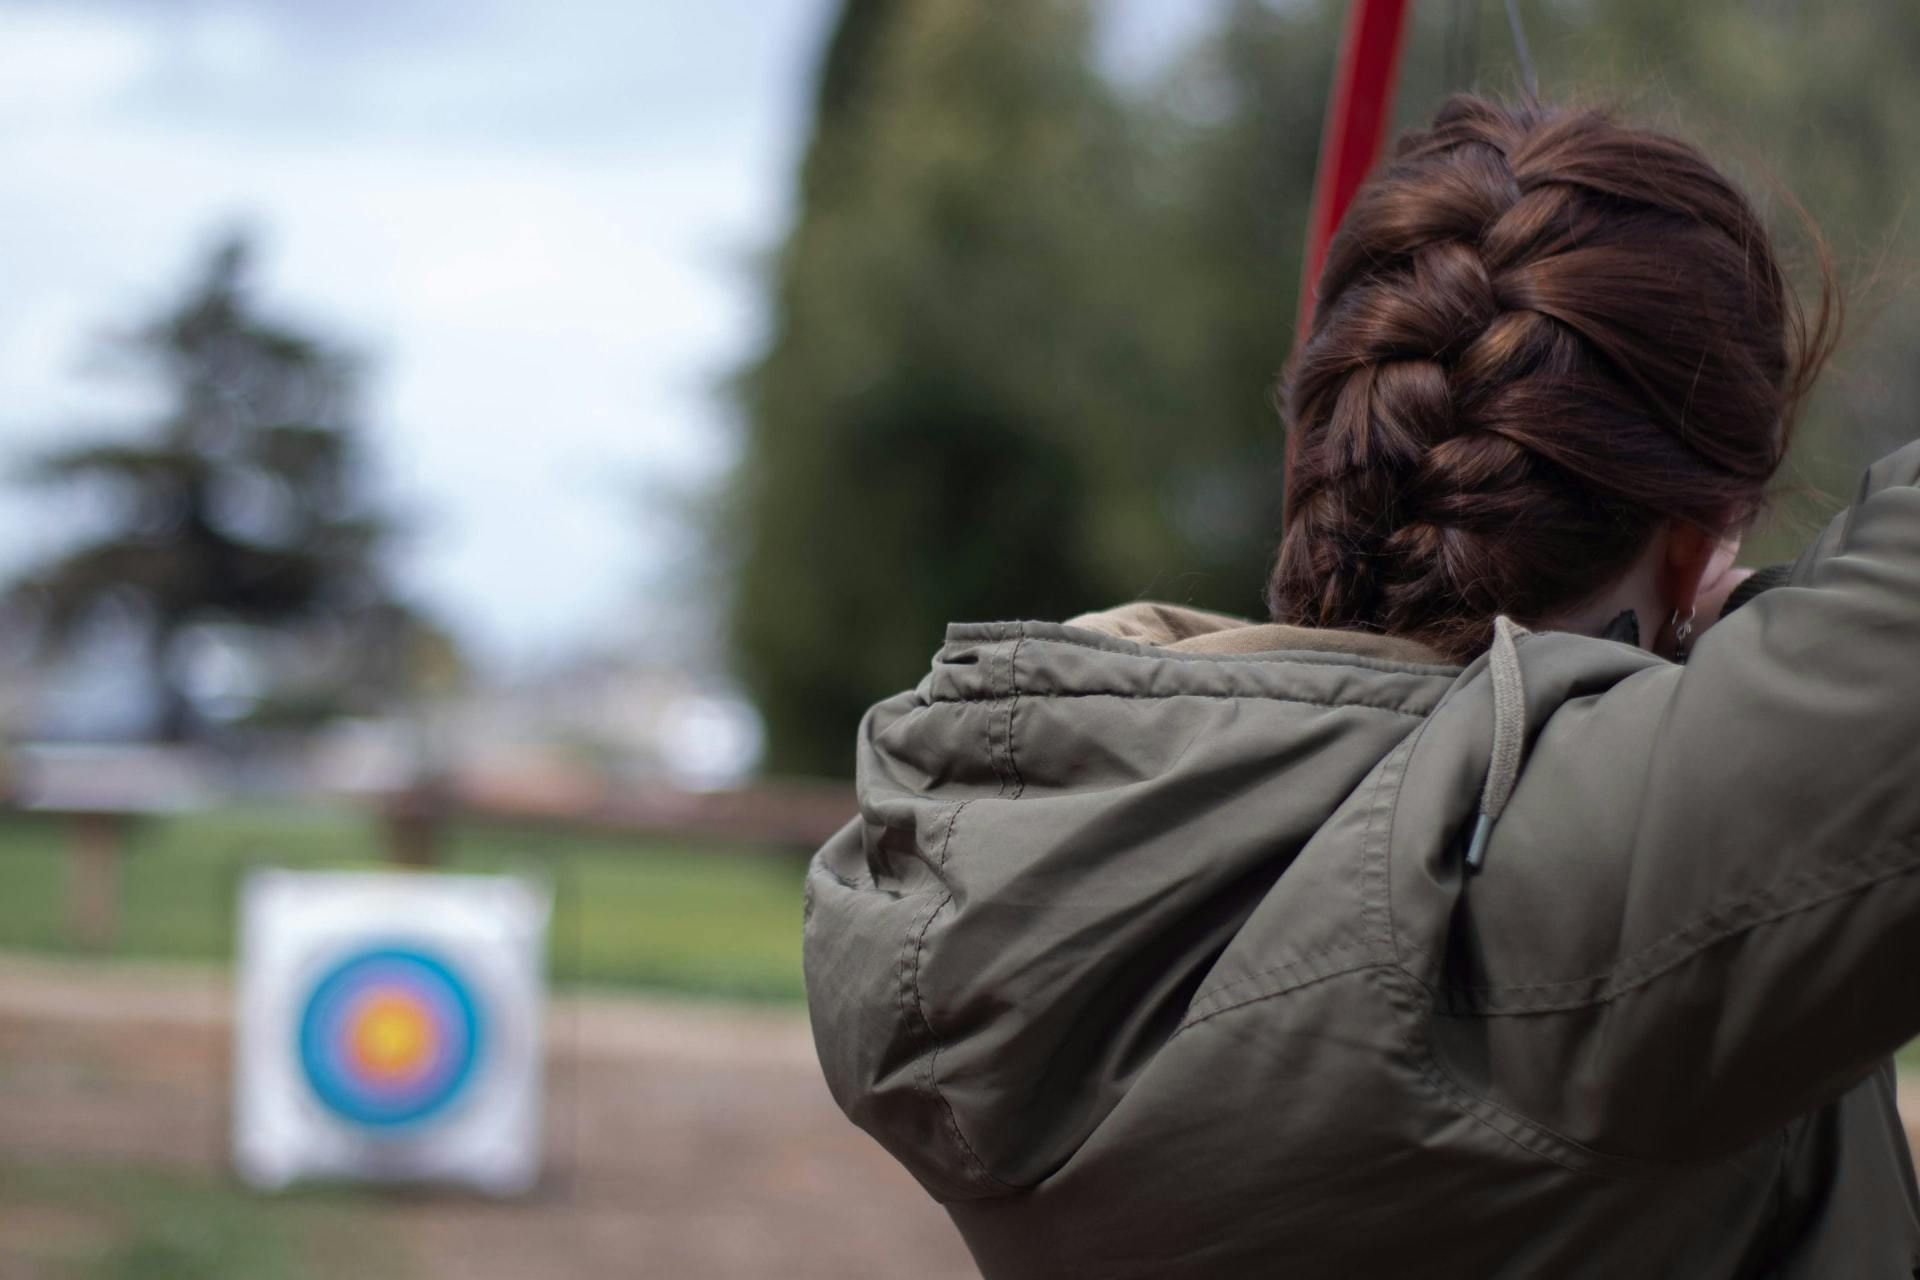 Woman shooting at archery target.